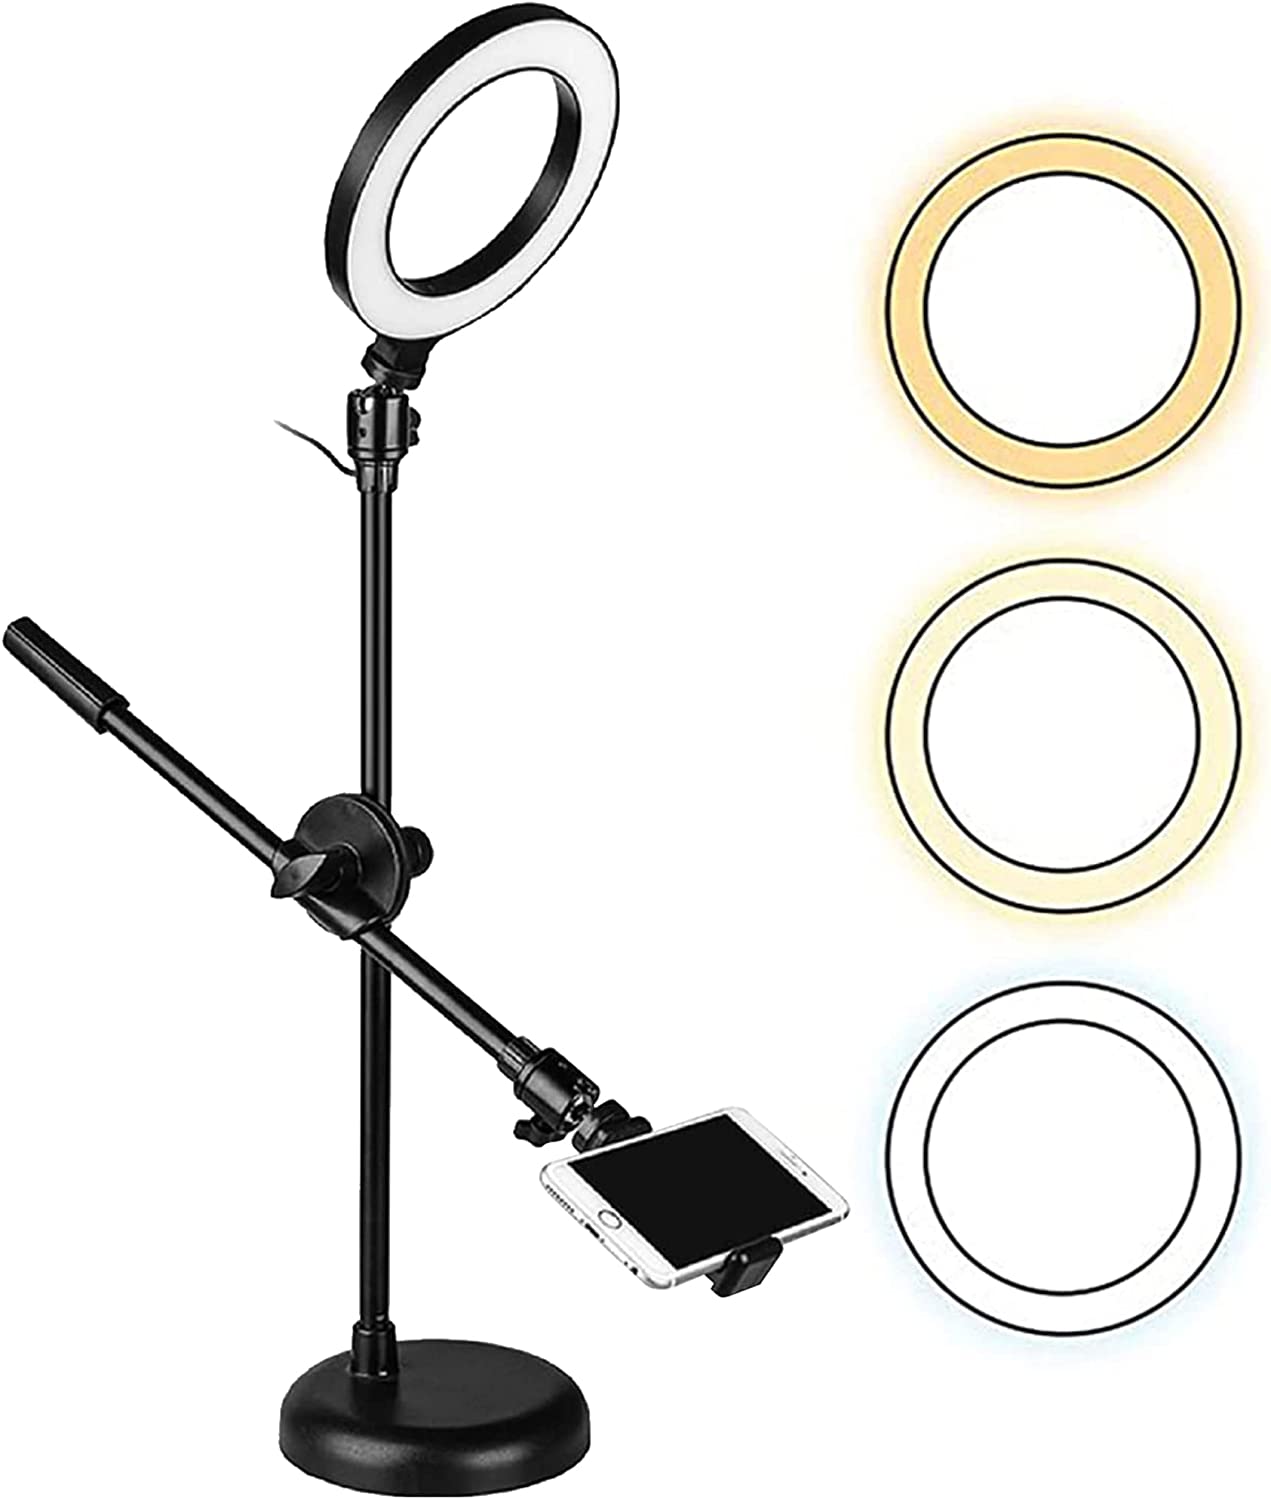 Amazon.com: UBeesize 12 inch Ring Light with Stand, Selfie Ring Light with  50